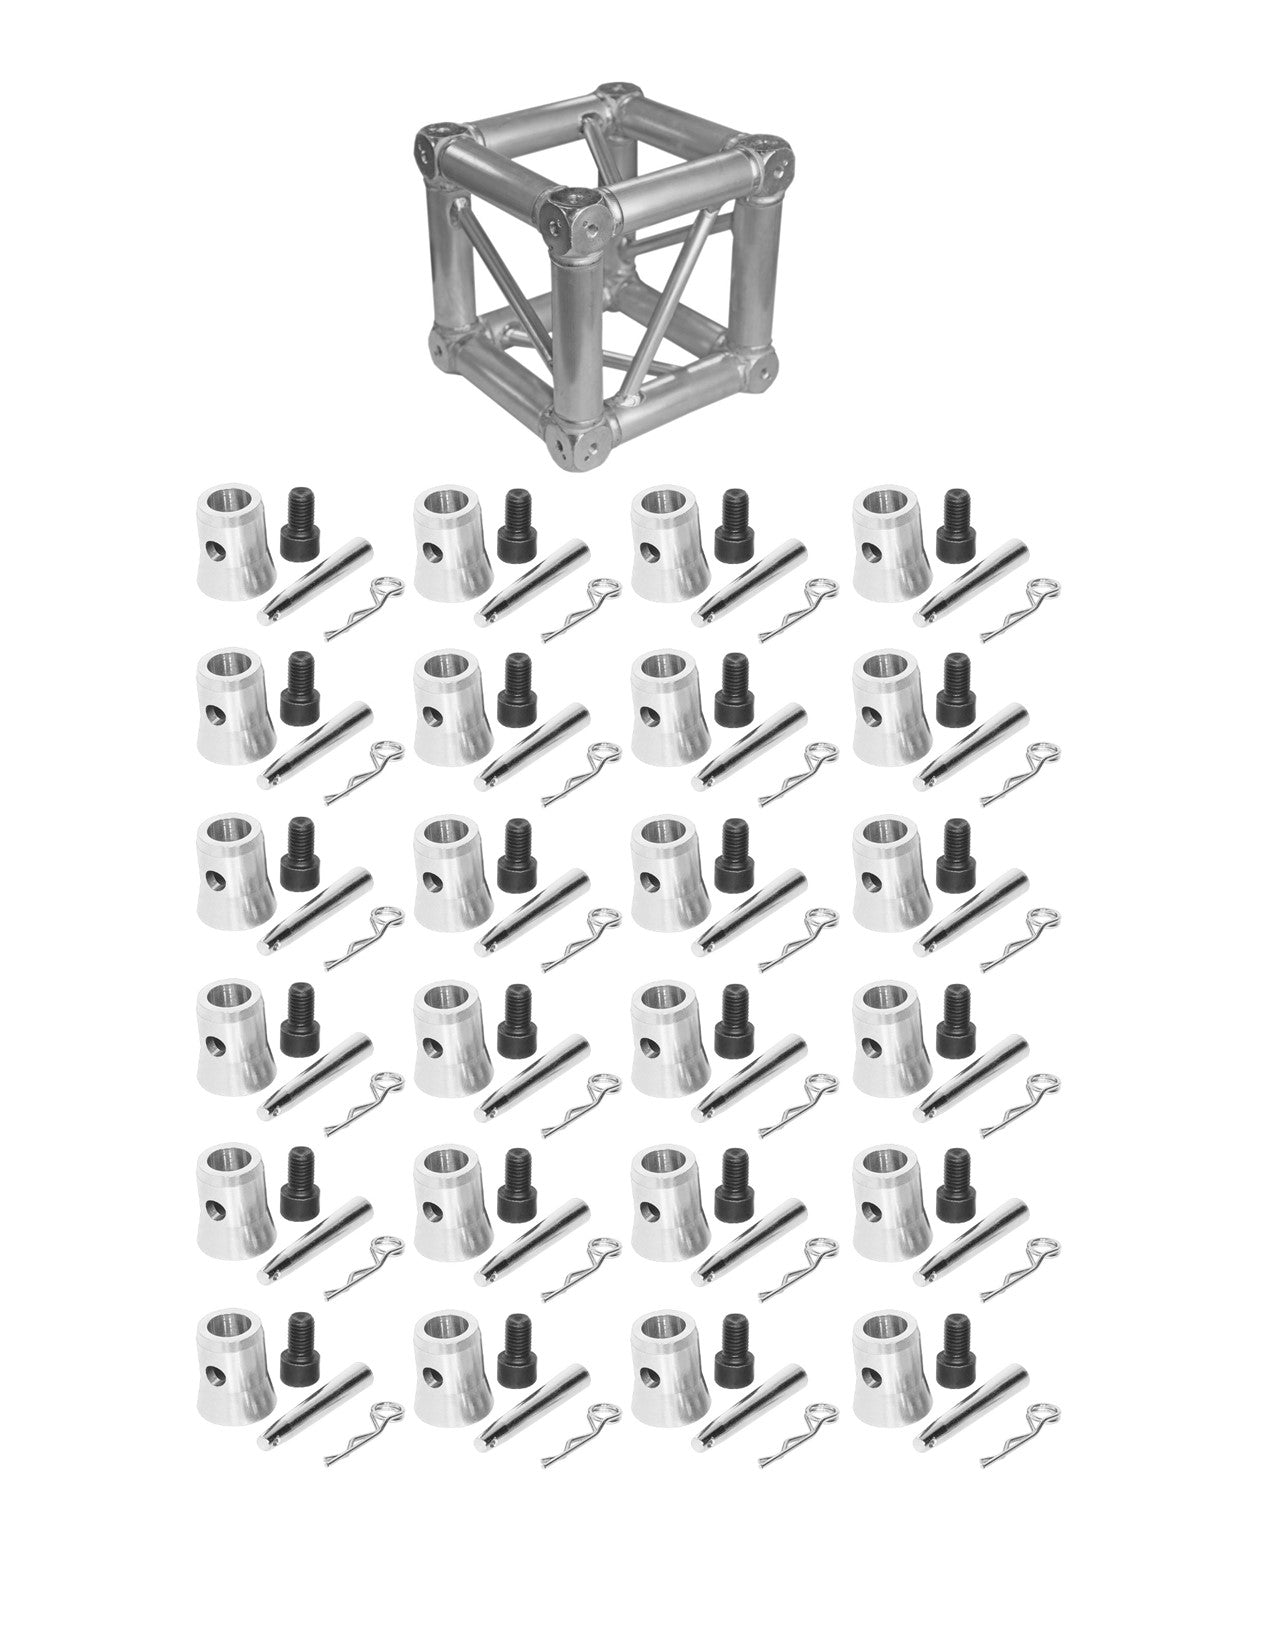 MR Truss TJB6W<BR/> Universal Corner Junction Block Box 1Way-6Way with 24 Half Conical Couplers for 6Way Installation